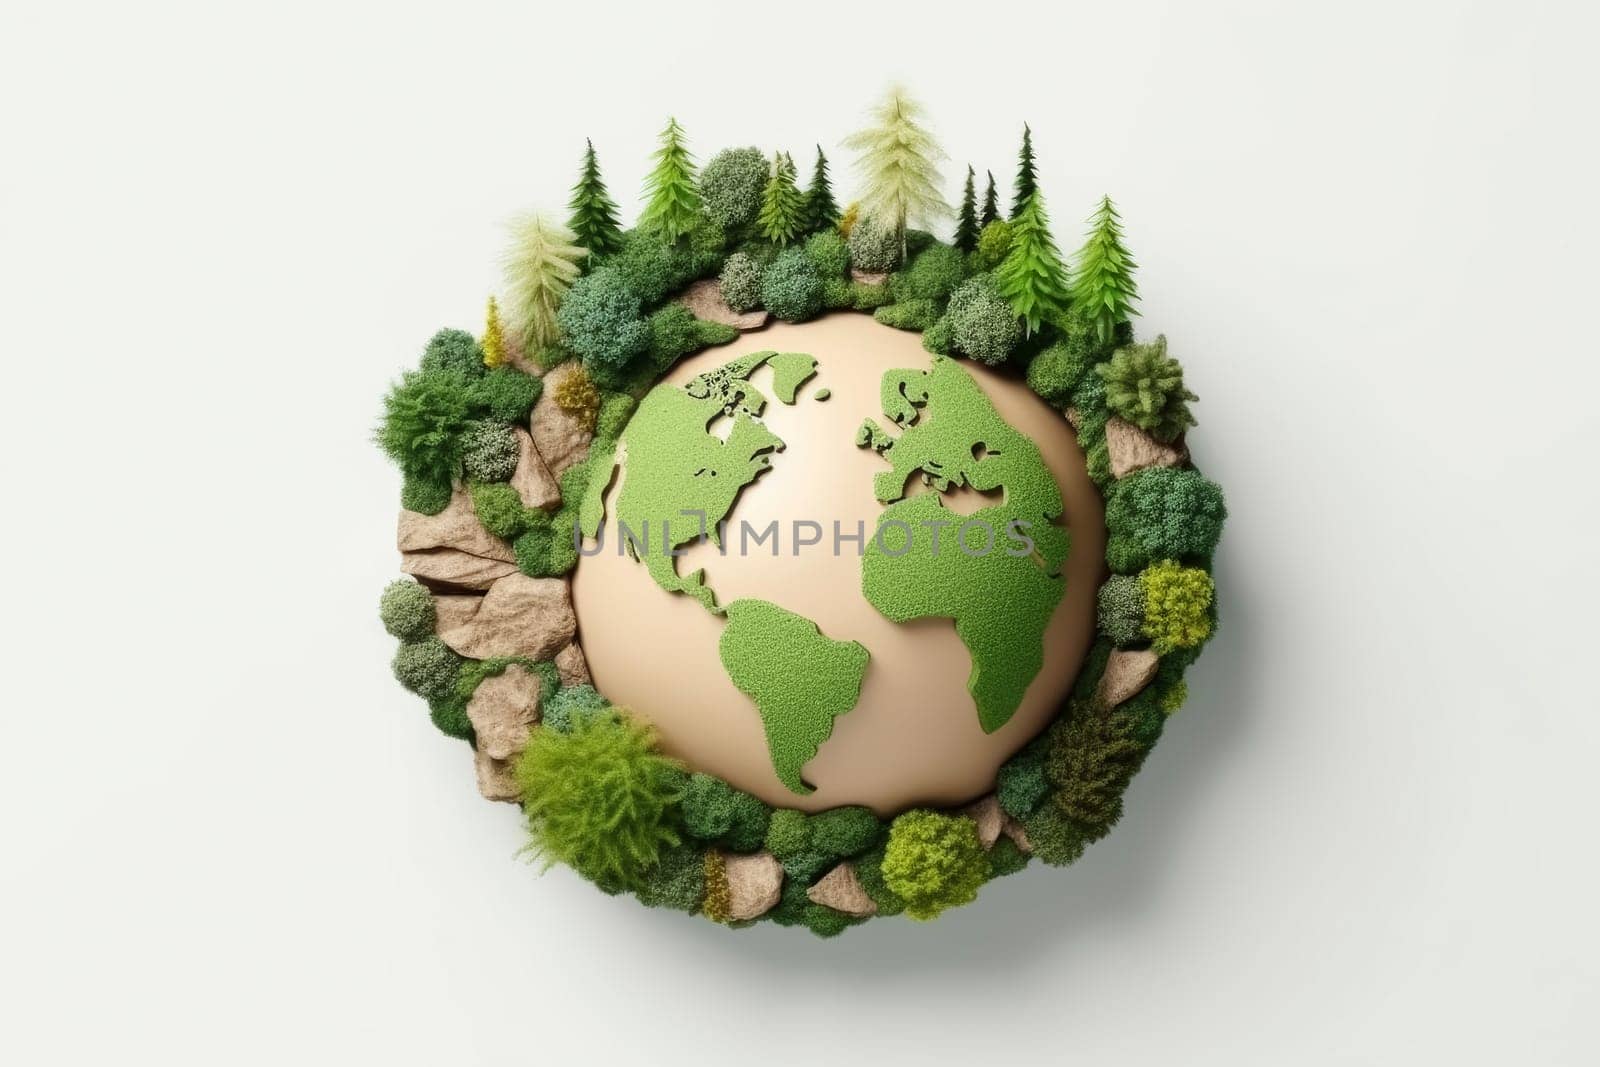 3D Rendered Eco Earth with Trees, Bushes, and Mountains by andreyz